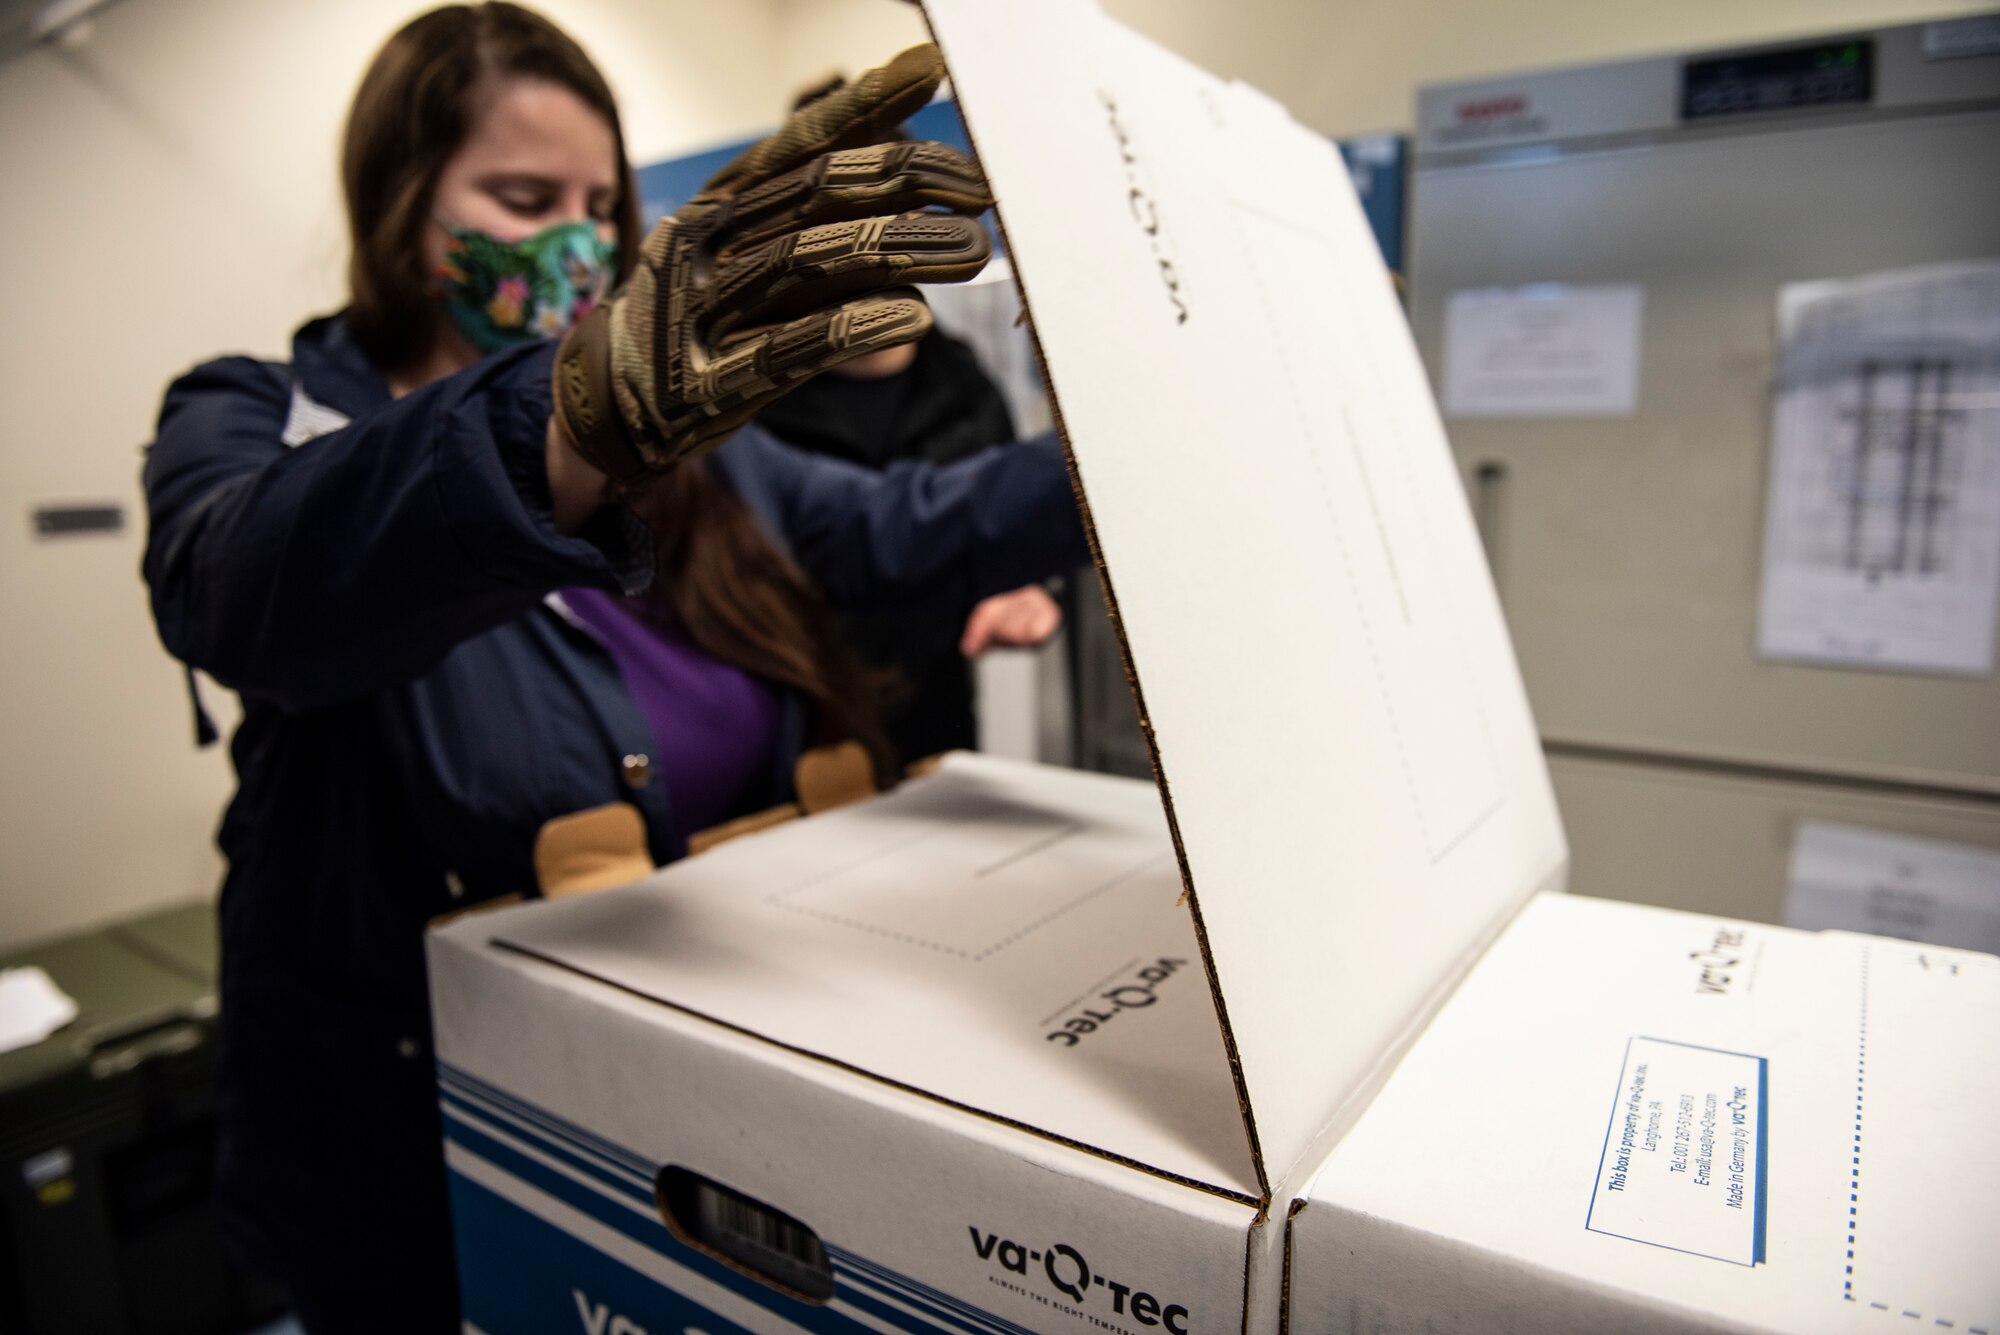 U.S. Air Force Staff Sgt. Anna Murray, 48th Medical Group immunizations technician, opens the first box of COVID-19 vaccinations delivered to Royal Air Force Lakenheath, England, Dec. 27, 2020. Initial quantities of the vaccine are limited and will be distributed on a rolling delivery basis as more vaccines become available. (U.S. Air Force photo by Airman 1st Class Jessi Monte)